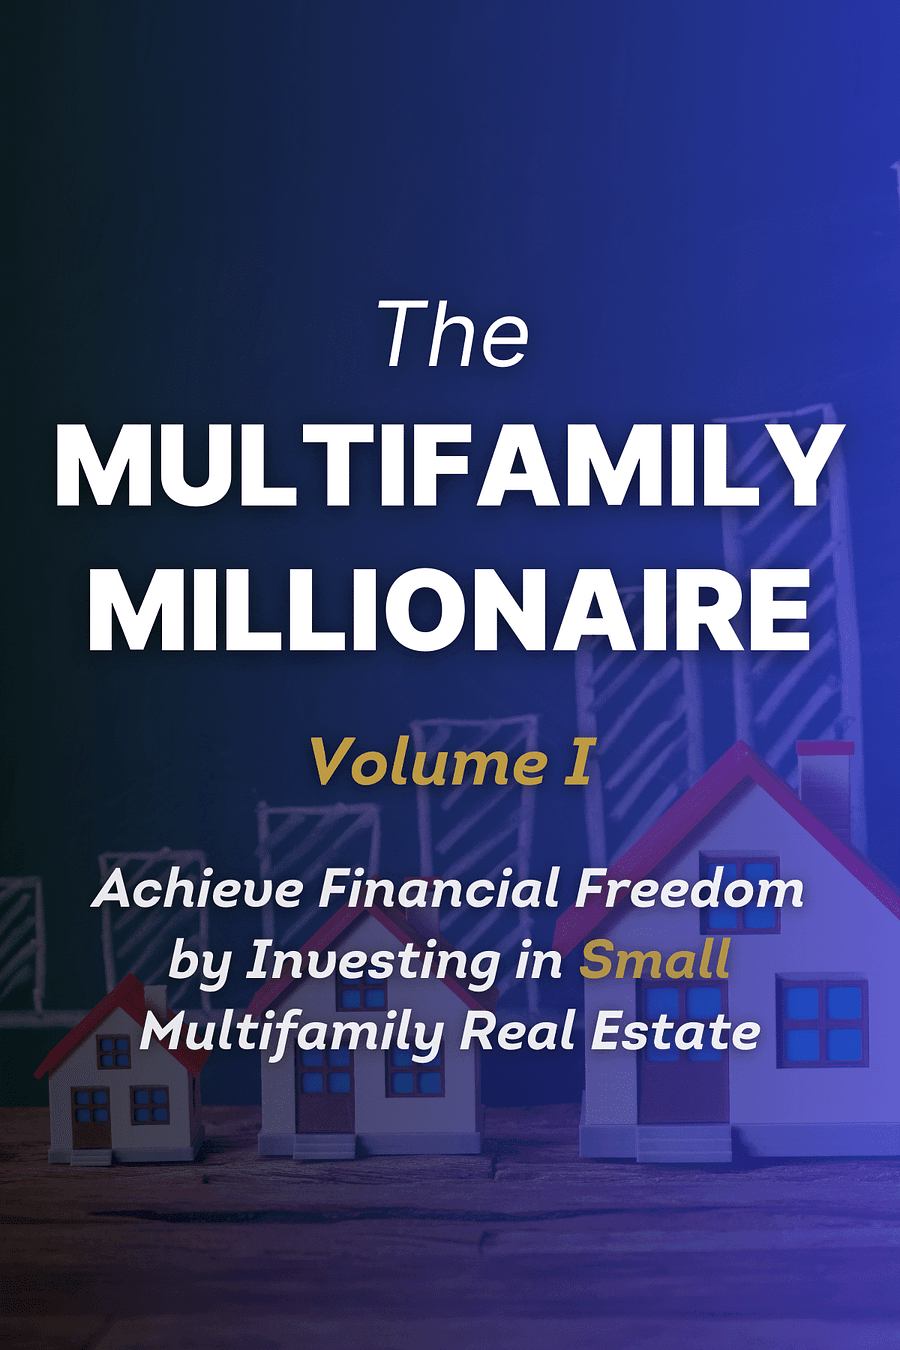 The Multifamily Millionaire, Volume I by Brian H. Murray, Brandon Turner - Book Summary